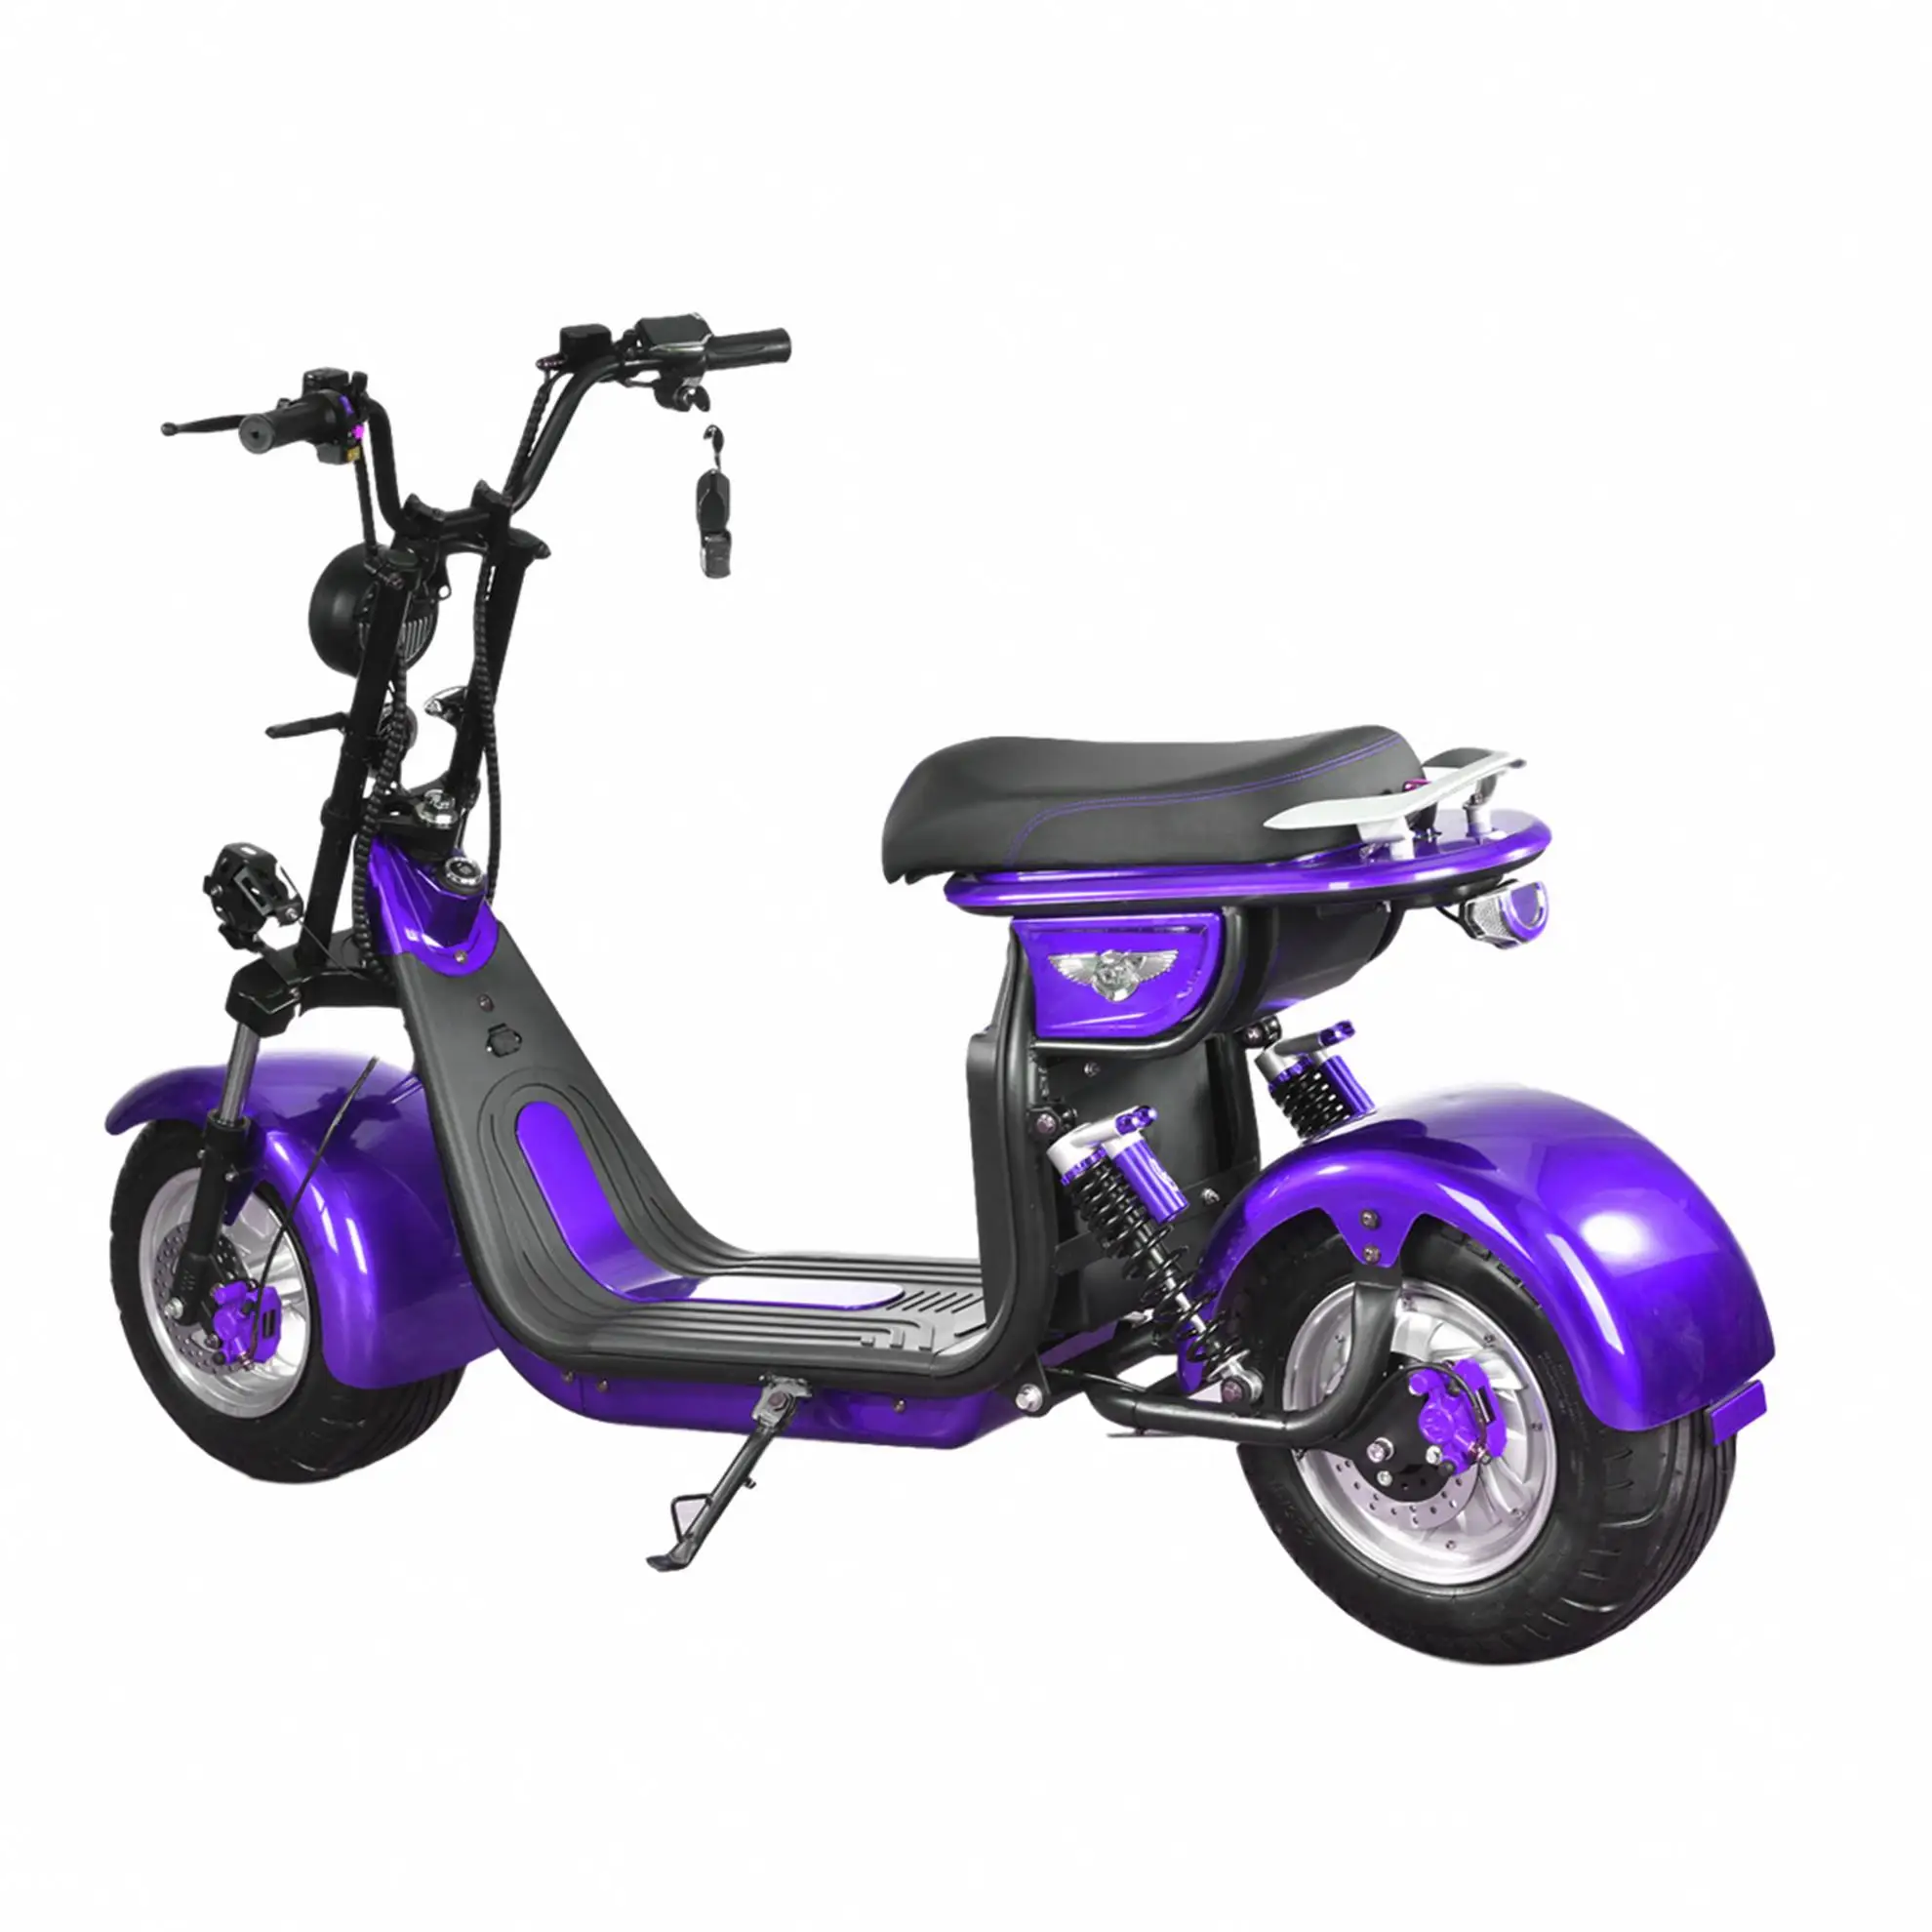 

YIDE 2 Seat Mobility Scooter City Scooter City Coco City Motor Cycle Off Road Citycoco Green Electric 1000W Motor Electric, Black